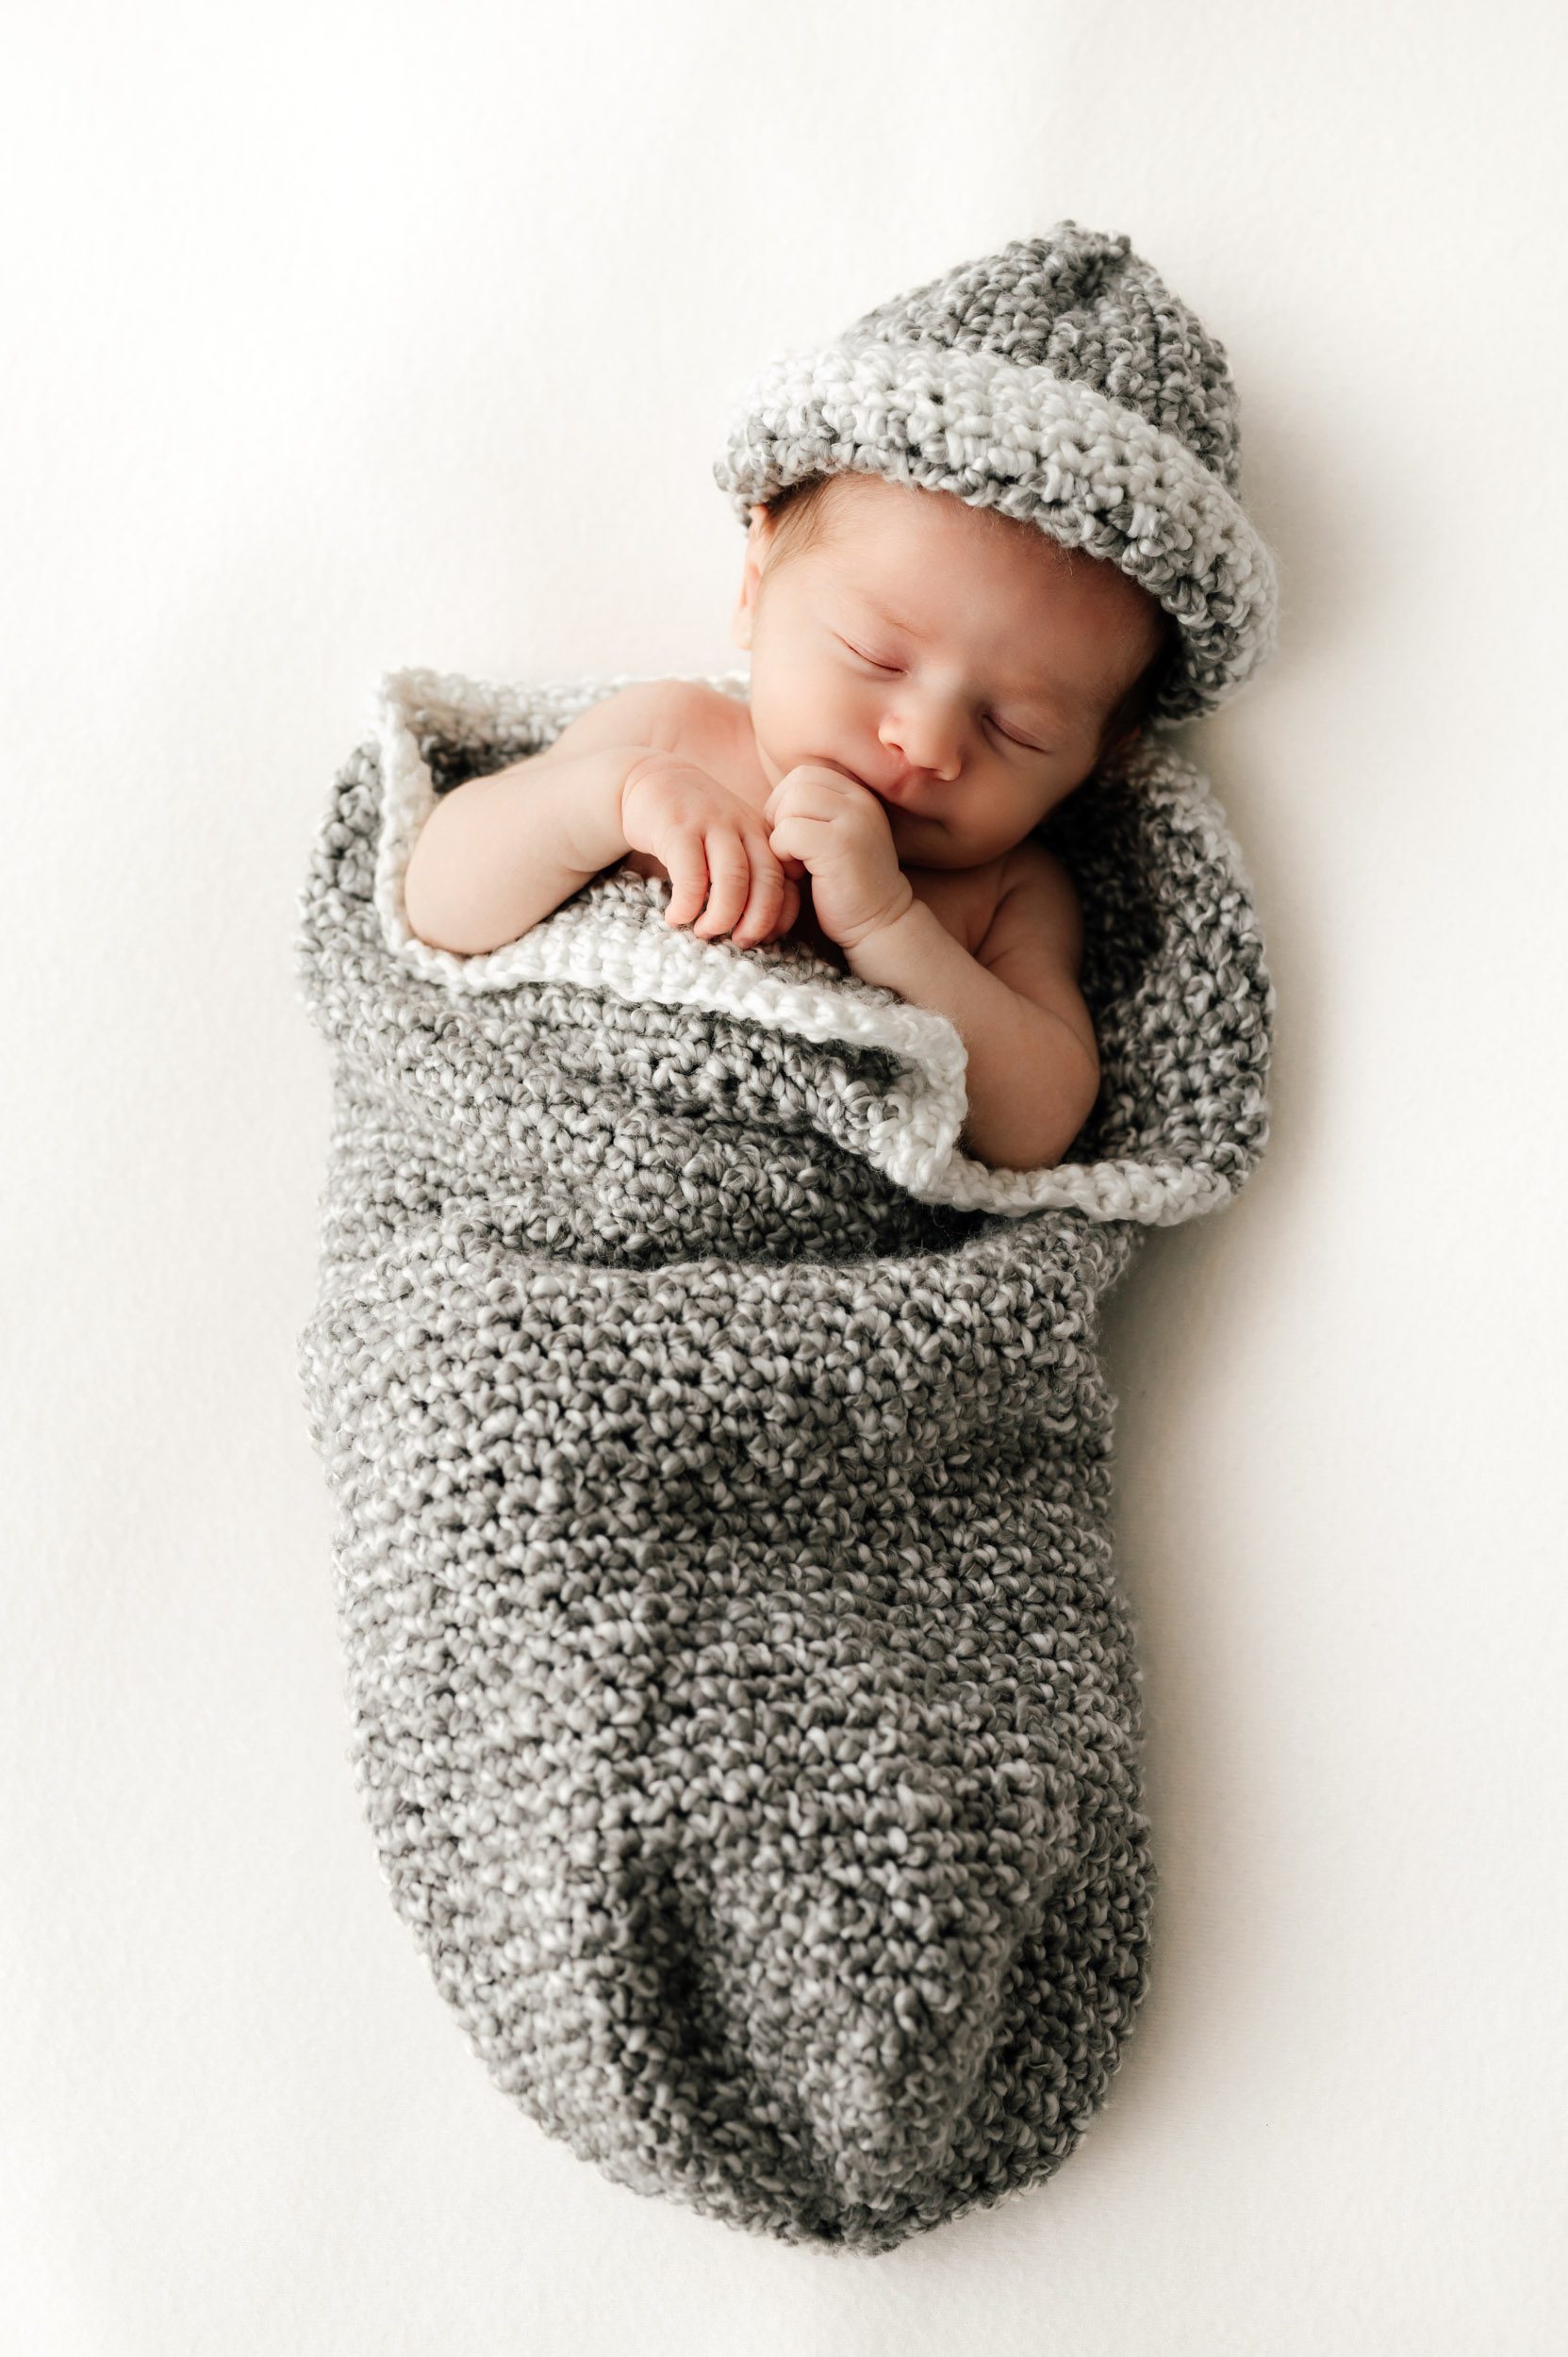 a baby boy laying on a white backdrop in a gray knit hat and sleep sack during a newborn photoshoot